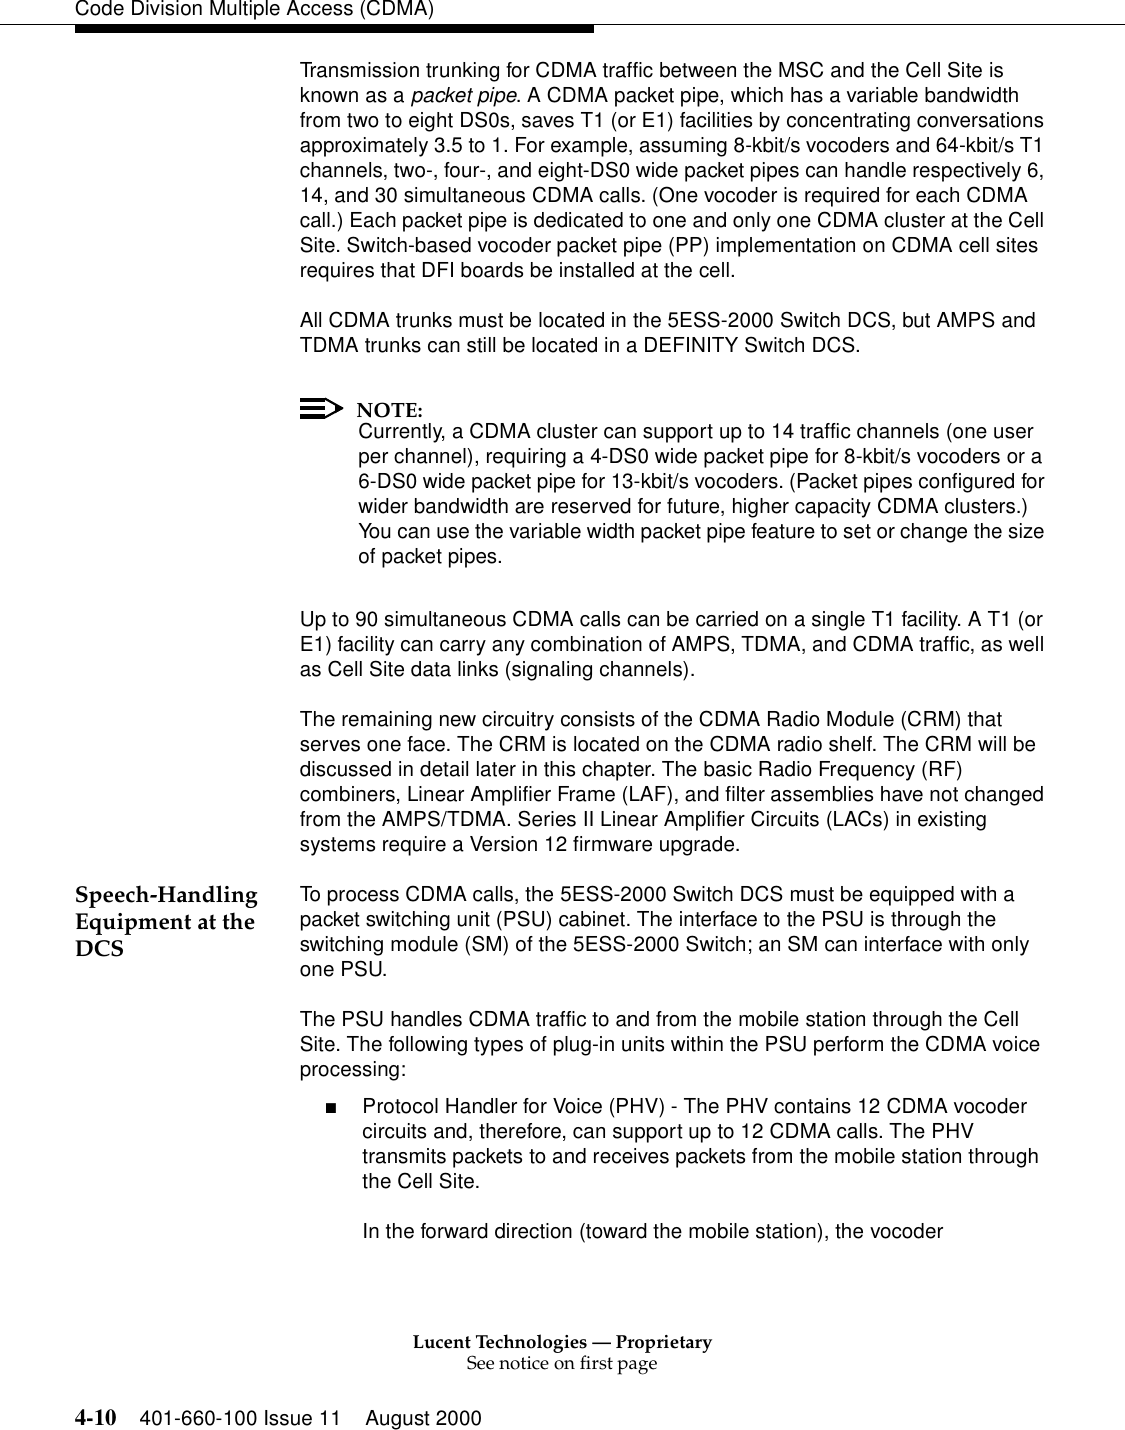 Lucent Technologies — ProprietarySee notice on first page4-10 401-660-100 Issue 11 August 2000Code Division Multiple Access (CDMA)Transmission trunking for CDMA traffic between the MSC and the Cell Site is known as a packet pipe. A CDMA packet pipe, which has a variable bandwidth from two to eight DS0s, saves T1 (or E1) facilities by concentrating conversations approximately 3.5 to 1. For example, assuming 8-kbit/s vocoders and 64-kbit/s T1 channels, two-, four-, and eight-DS0 wide packet pipes can handle respectively 6, 14, and 30 simultaneous CDMA calls. (One vocoder is required for each CDMA call.) Each packet pipe is dedicated to one and only one CDMA cluster at the Cell Site. Switch-based vocoder packet pipe (PP) implementation on CDMA cell sites requires that DFI boards be installed at the cell.All CDMA trunks must be located in the 5ESS-2000 Switch DCS, but AMPS and TDMA trunks can still be located in a DEFINITY Switch DCS. NOTE:Currently, a CDMA cluster can support up to 14 traffic channels (one user per channel), requiring a 4-DS0 wide packet pipe for 8-kbit/s vocoders or a 6-DS0 wide packet pipe for 13-kbit/s vocoders. (Packet pipes configured for wider bandwidth are reserved for future, higher capacity CDMA clusters.) You can use the variable width packet pipe feature to set or change the size of packet pipes.Up to 90 simultaneous CDMA calls can be carried on a single T1 facility. A T1 (or E1) facility can carry any combination of AMPS, TDMA, and CDMA traffic, as well as Cell Site data links (signaling channels).The remaining new circuitry consists of the CDMA Radio Module (CRM) that serves one face. The CRM is located on the CDMA radio shelf. The CRM will be discussed in detail later in this chapter. The basic Radio Frequency (RF) combiners, Linear Amplifier Frame (LAF), and filter assemblies have not changed from the AMPS/TDMA. Series II Linear Amplifier Circuits (LACs) in existing systems require a Version 12 firmware upgrade. Speech-Handling Equipment at the DCSTo process CDMA calls, the 5ESS-2000 Switch DCS must be equipped with a packet switching unit (PSU) cabinet. The interface to the PSU is through the switching module (SM) of the 5ESS-2000 Switch; an SM can interface with only one PSU.The PSU handles CDMA traffic to and from the mobile station through the Cell Site. The following types of plug-in units within the PSU perform the CDMA voice processing:■Protocol Handler for Voice (PHV) - The PHV contains 12 CDMA vocoder circuits and, therefore, can support up to 12 CDMA calls. The PHV transmits packets to and receives packets from the mobile station through the Cell Site.In the forward direction (toward the mobile station), the vocoder 